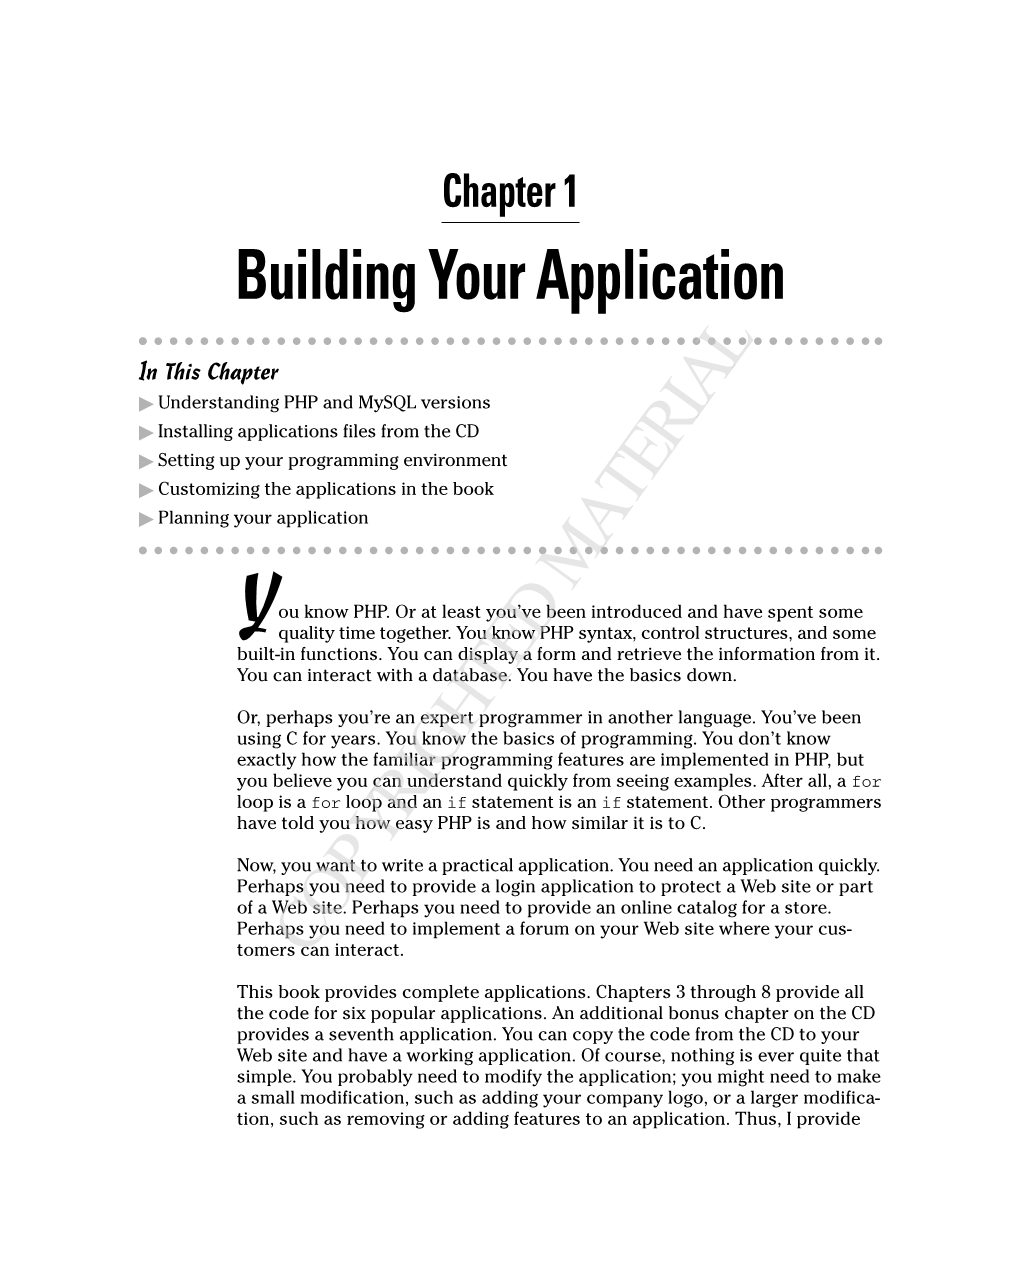 Building Your Application